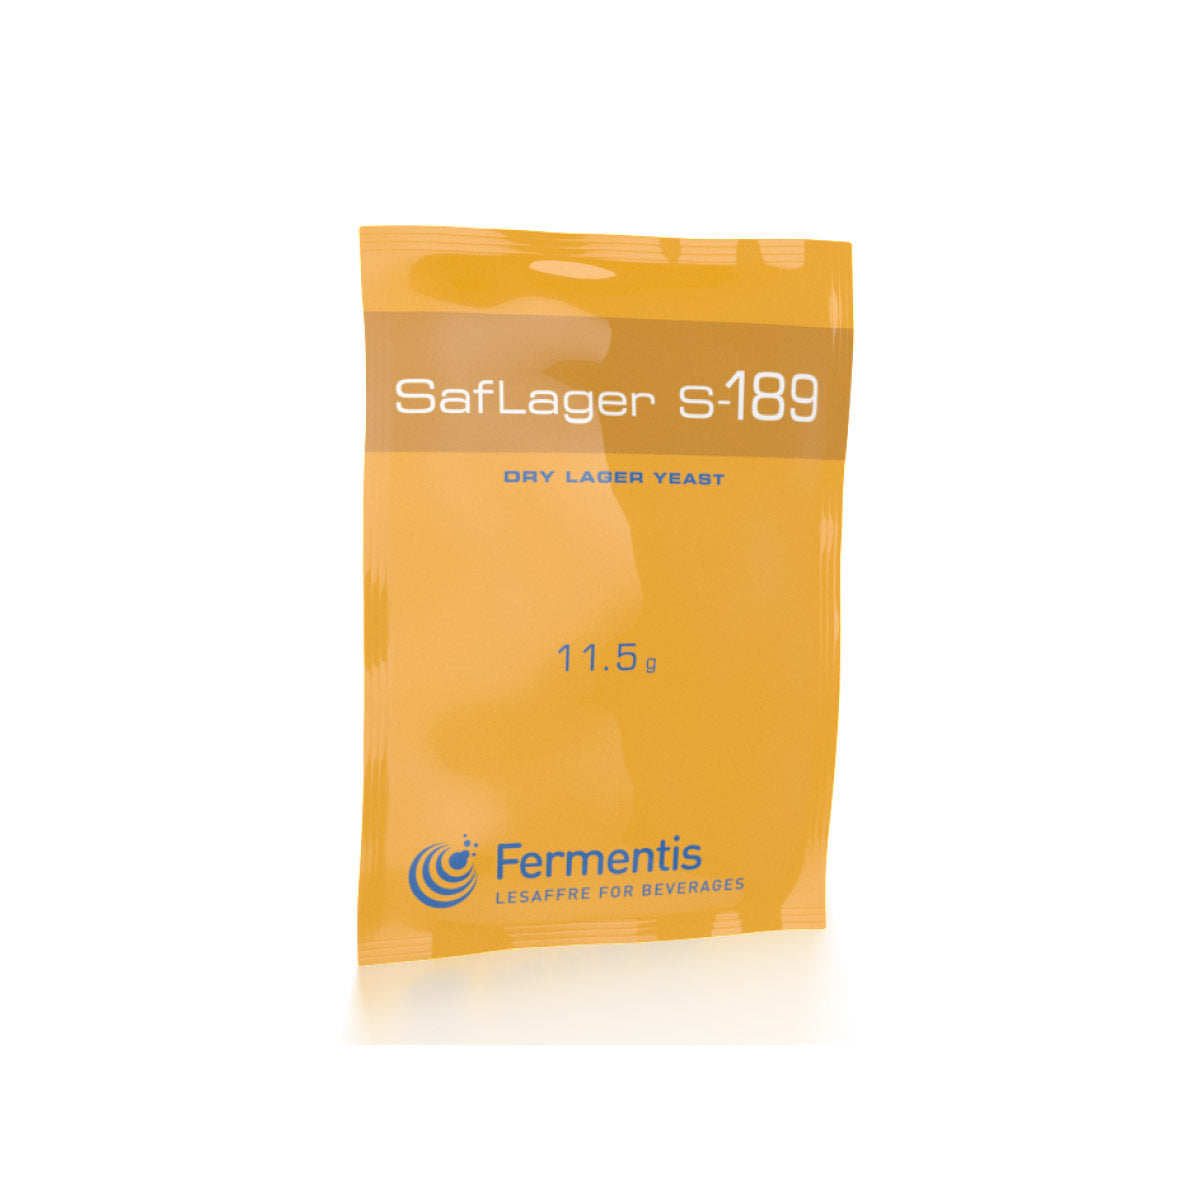 Saflager S-189 - Dry Lager Yeast - 11.5 Grams